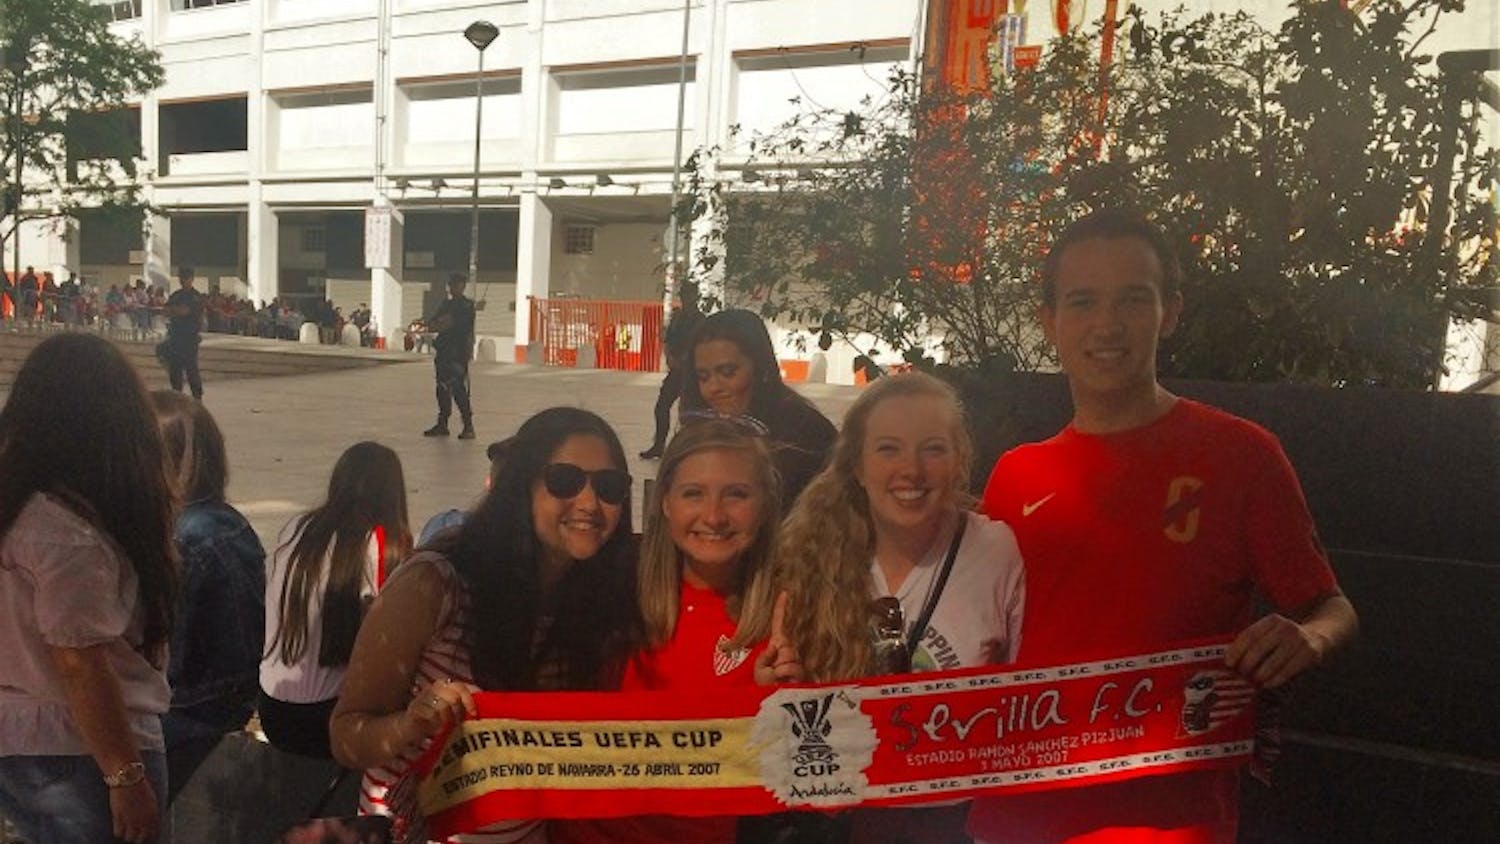 Alyson Malinger and friends attended the Sevilla-Real Betis soccer game Sunday at the Ramón Sánchez Pizjuán Stadium. Sevilla beat Real Betis 2-0 adding to the two team’s rivalry.